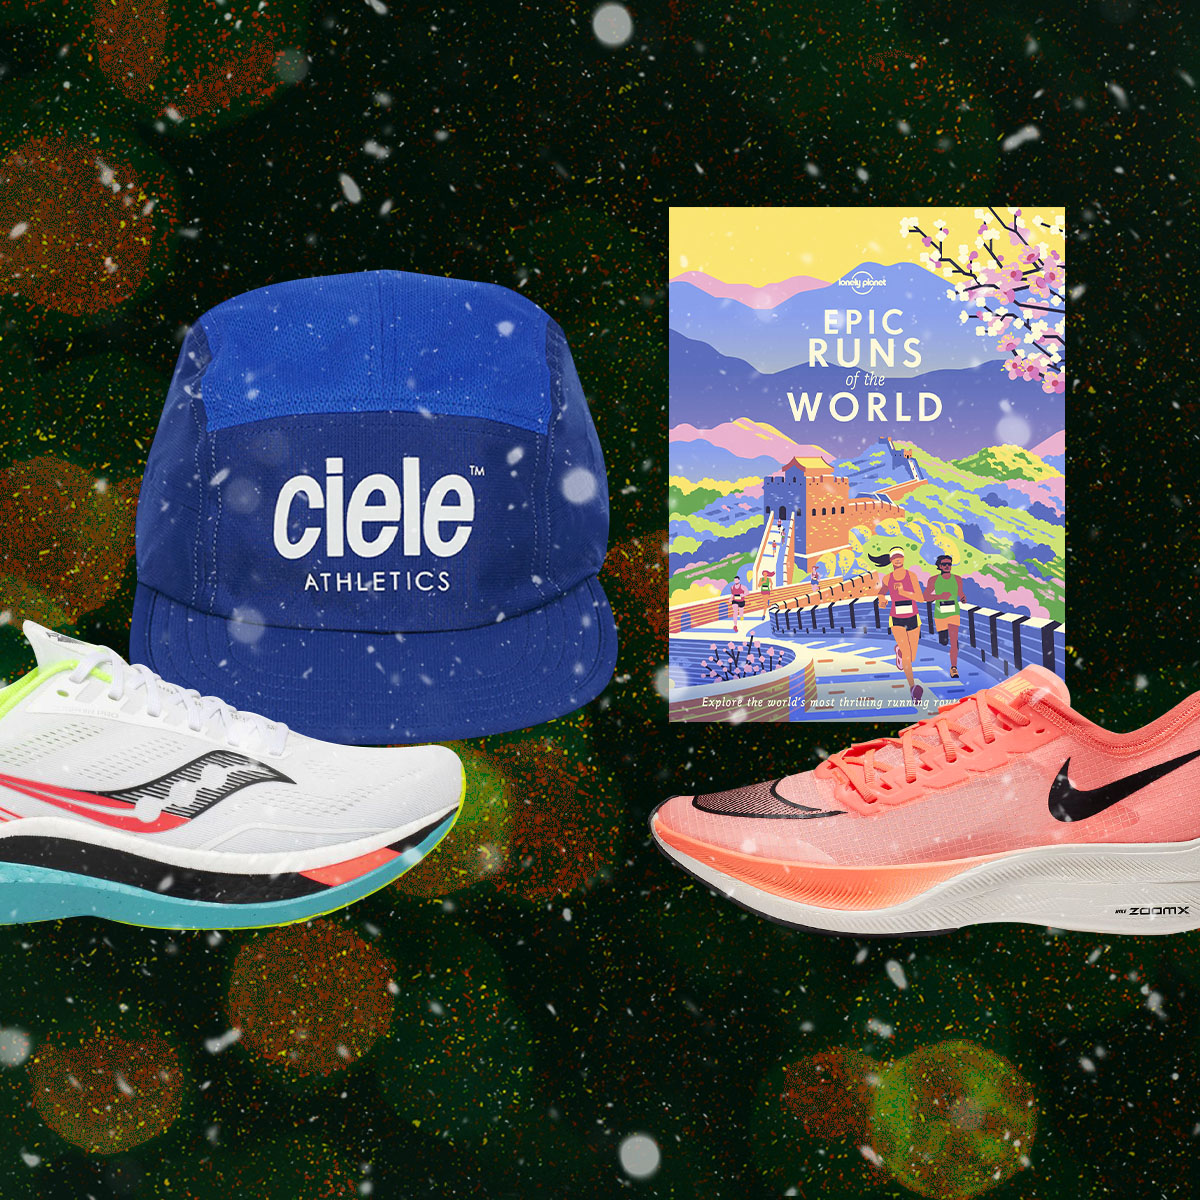 sneakers, running caps and a book about running